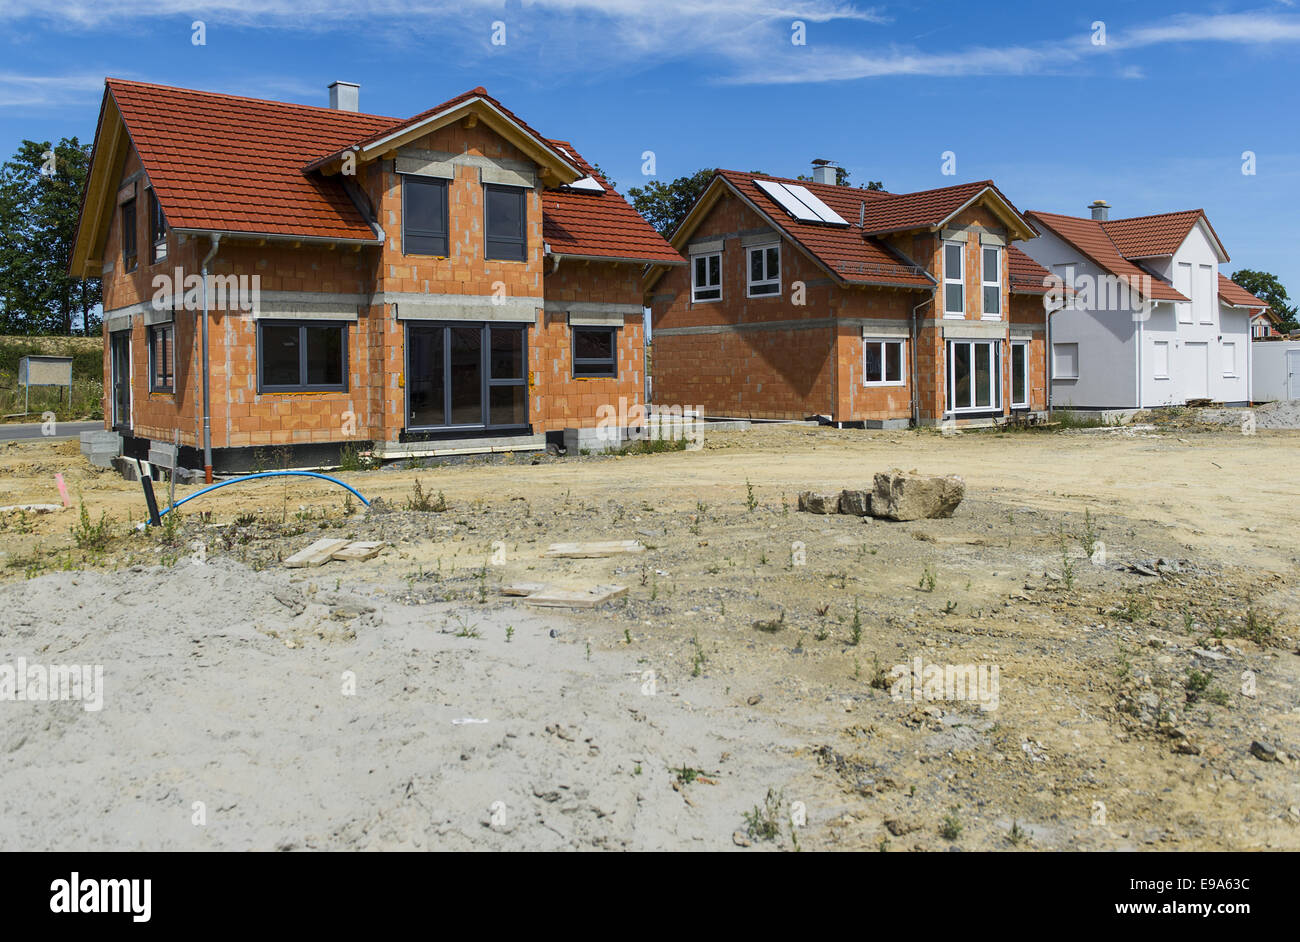 Development area of a residential area Stock Photo